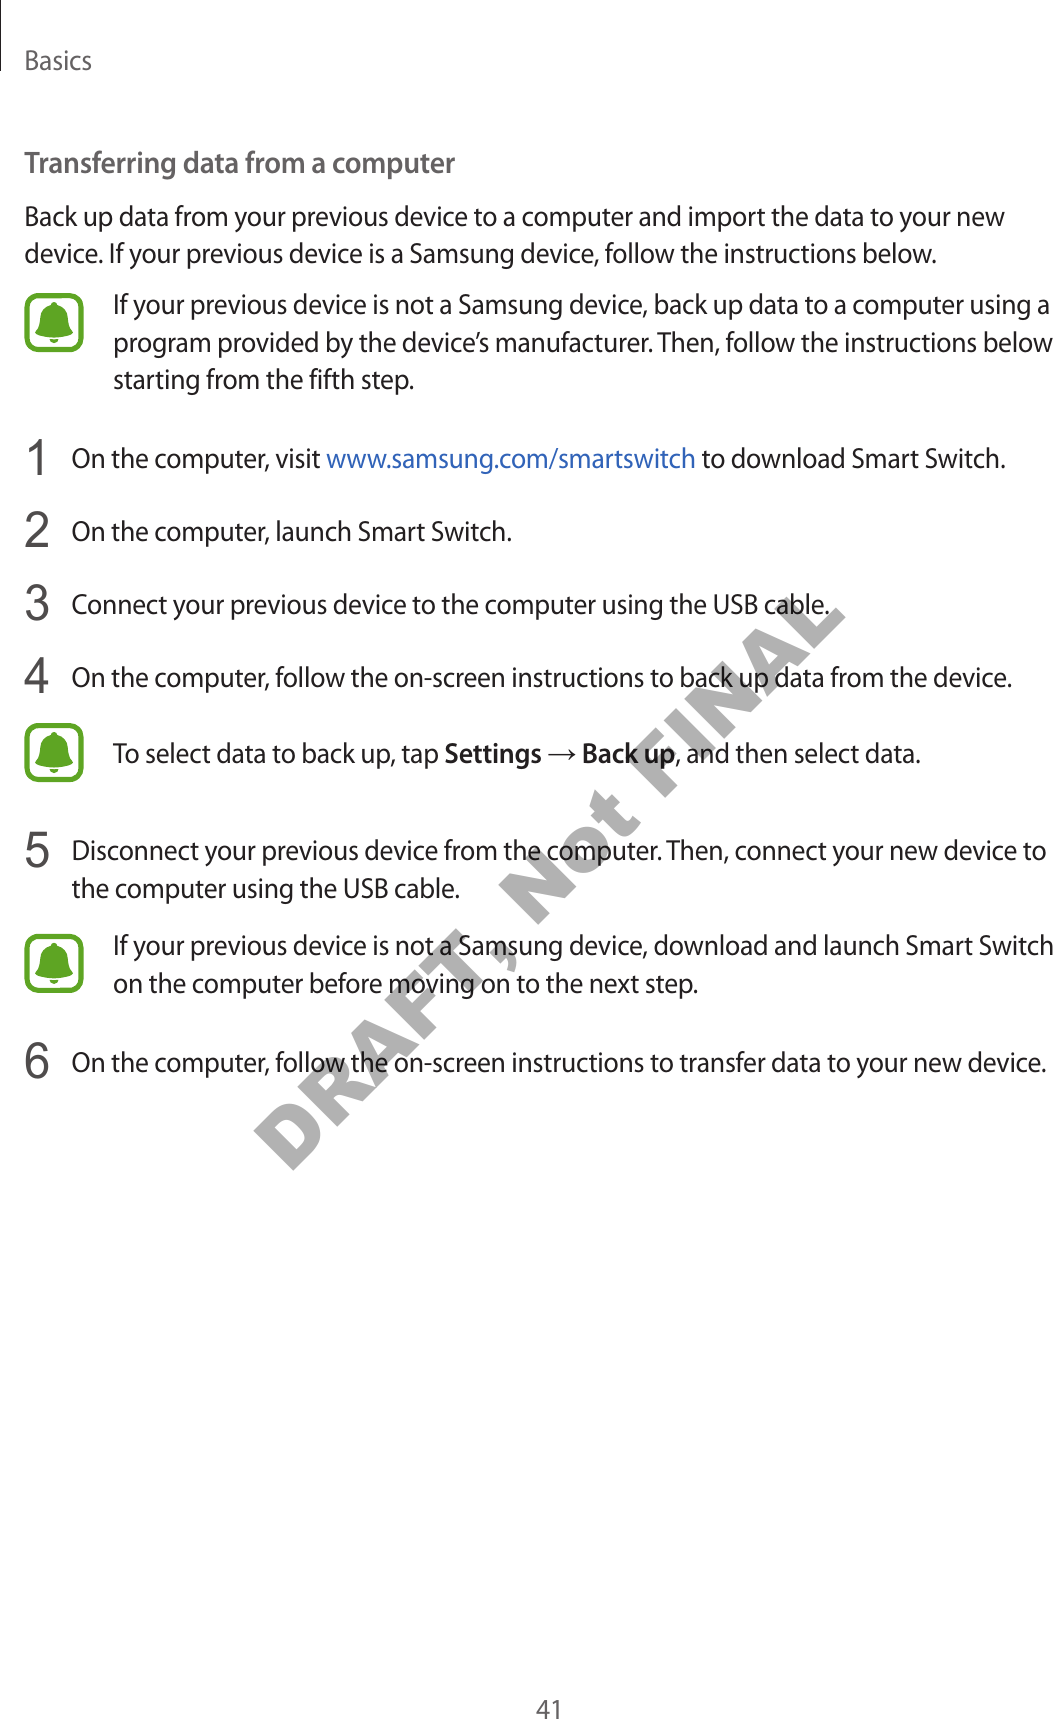 Basics41Transferring data from a computerBack up data from your previous device to a computer and import the data to your new device. If your previous device is a Samsung device, follow the instructions below.If your previous device is not a Samsung device, back up data to a computer using a program provided by the device’s manufacturer. Then, follow the instructions below starting from the fifth step.1  On the computer, visit www.samsung.com/smartswitch to download Smart Switch.2  On the computer, launch Smart Switch.3  Connect your previous device to the computer using the USB cable.4  On the computer, follow the on-screen instructions to back up data from the device.To select data to back up, tap Settings → Back up, and then select data.5  Disconnect your previous device from the computer. Then, connect your new device tothe computer using the USB cable.If your previous device is not a Samsung device, download and launch Smart Switch on the computer before moving on to the next step.6  On the computer, follow the on-screen instructions to transfer data to your new device.DRAFT, Not FINAL